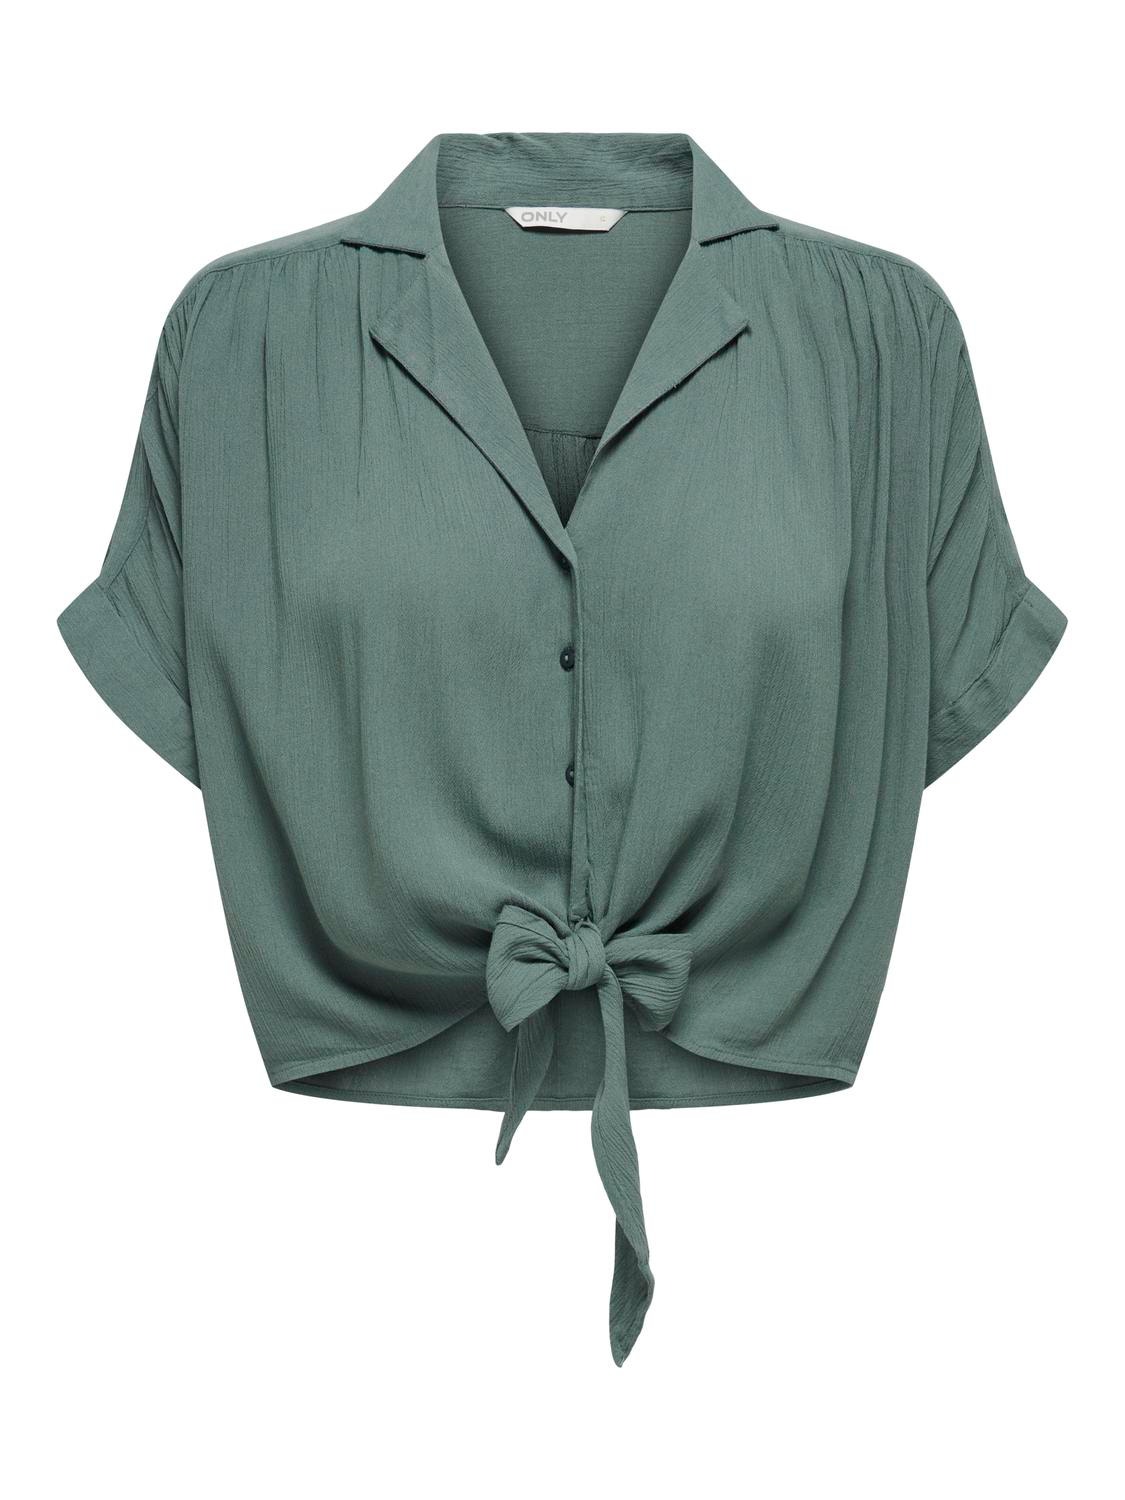 ONLY Short Sleeved Shirt With Knot Detail -Balsam Green - 15281497